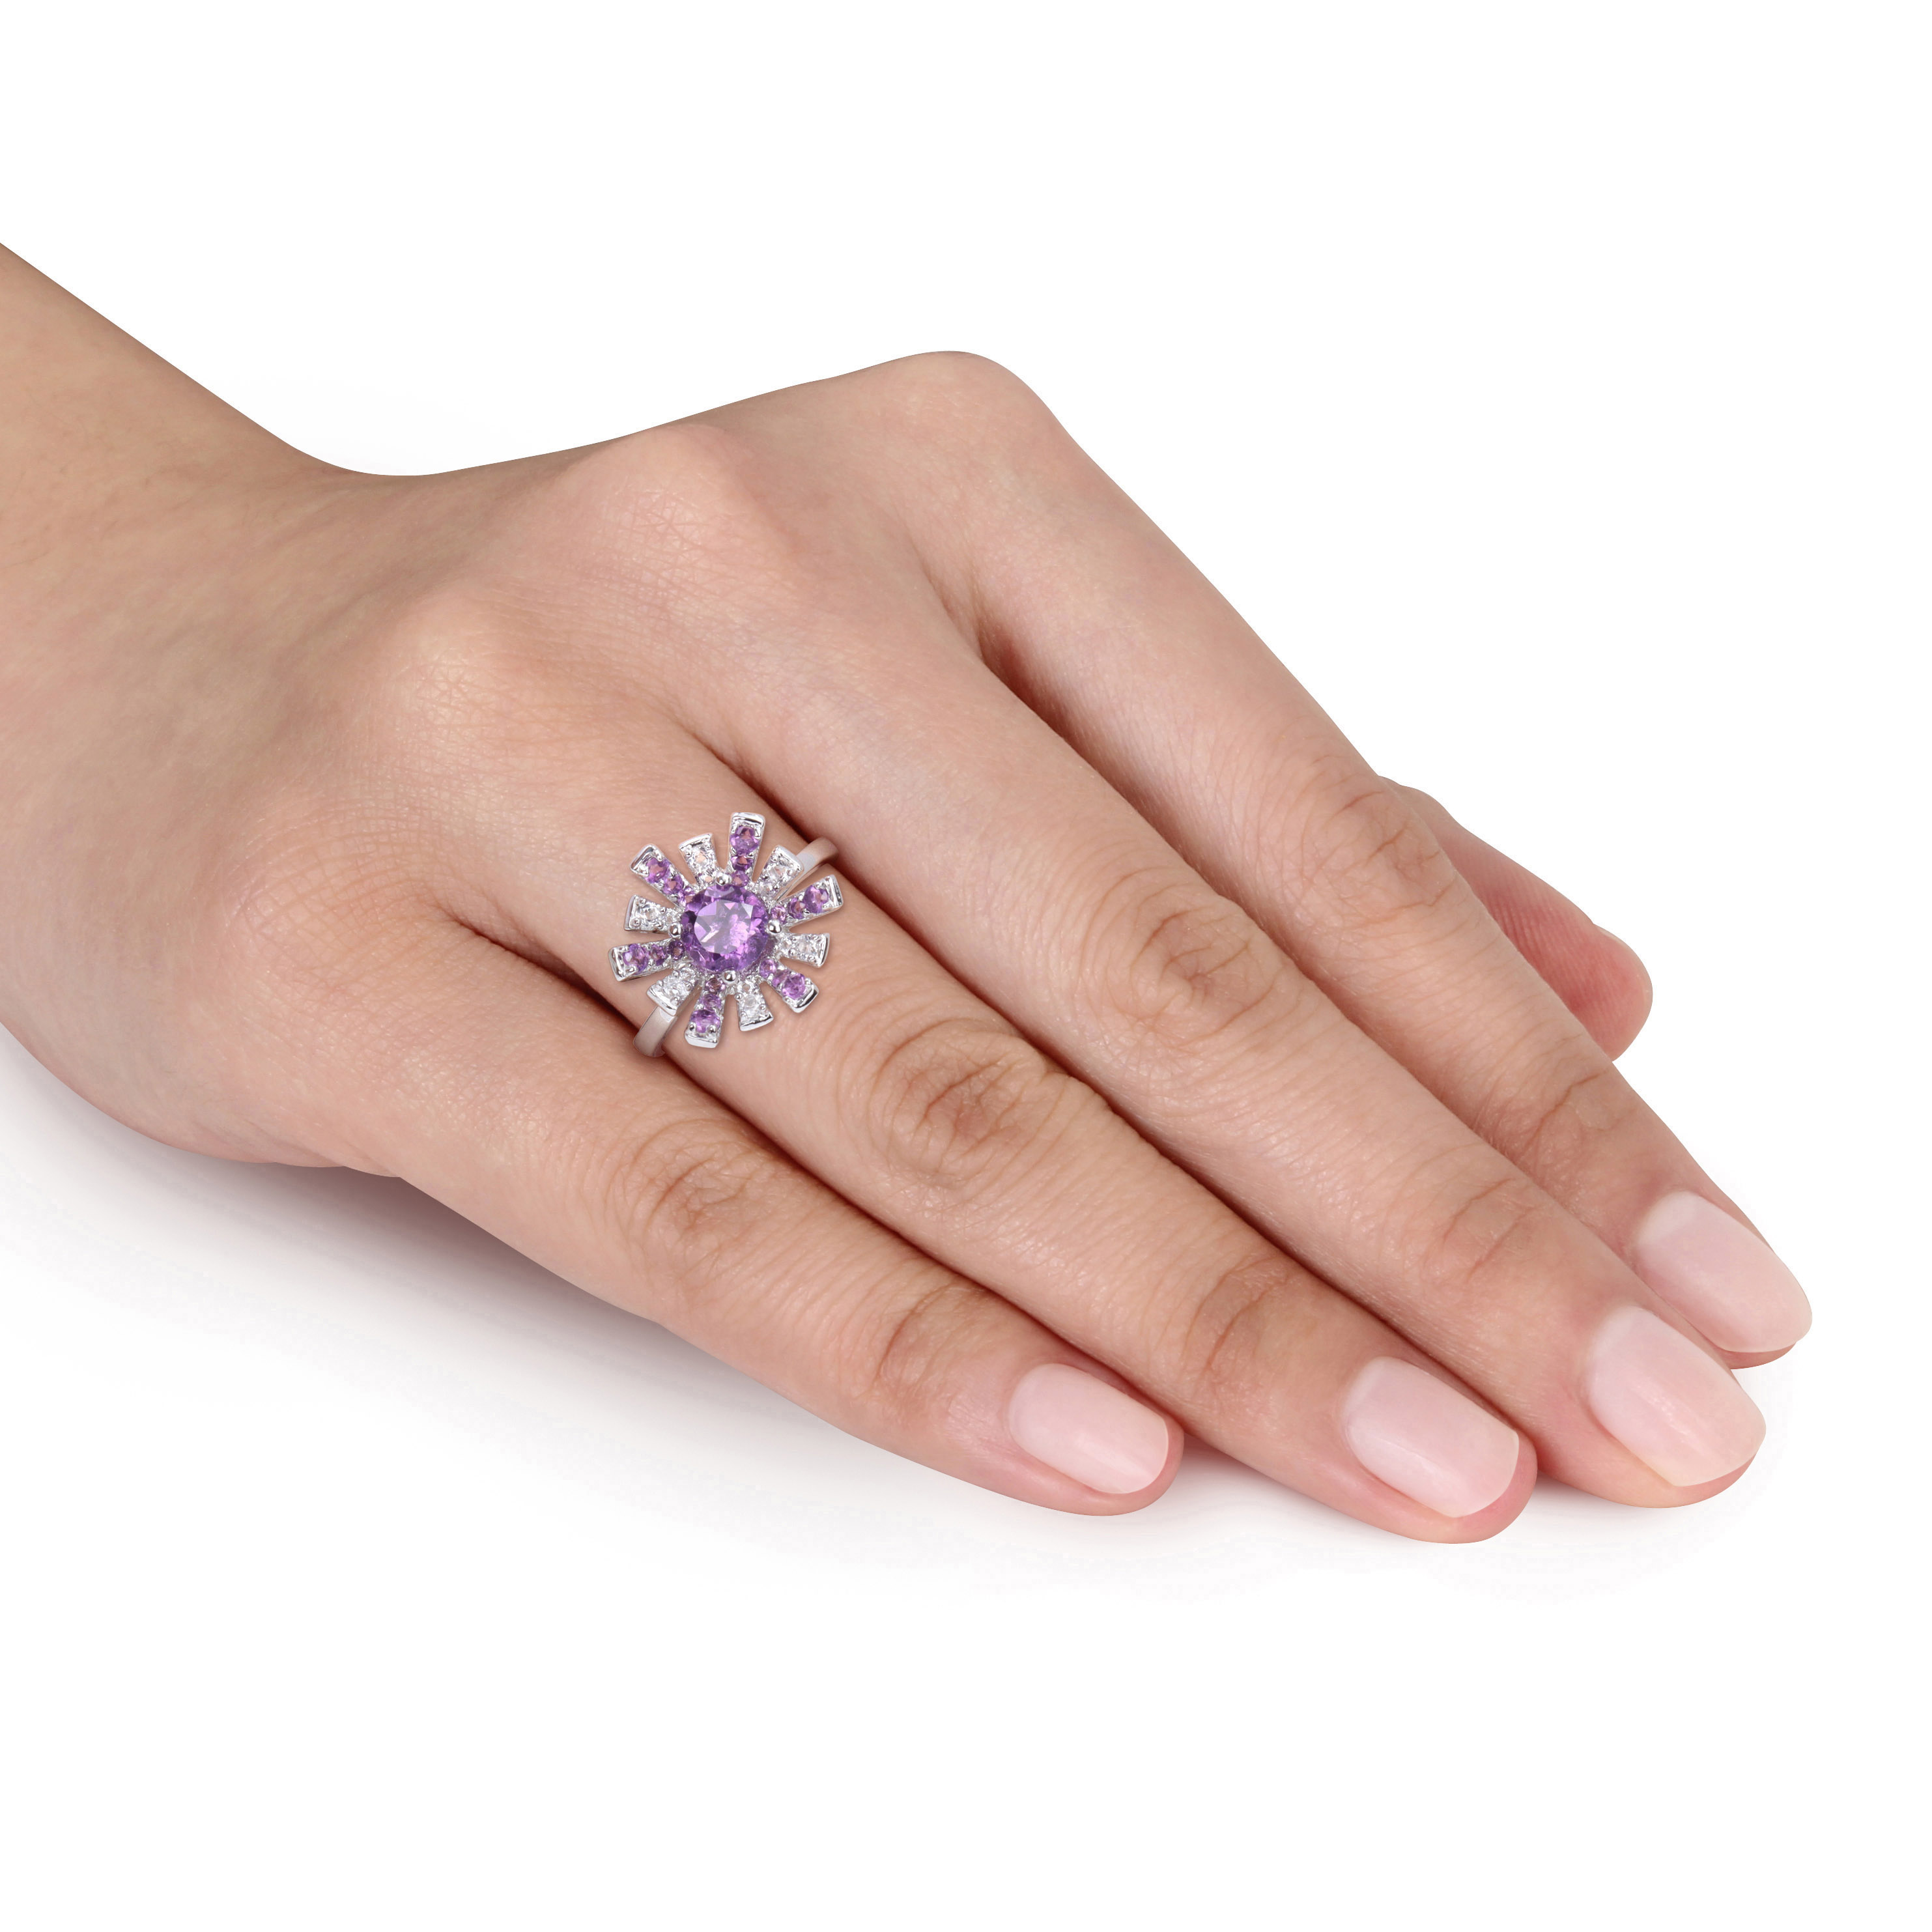 1 3/8 CT TGW African Amethyst and White Topaz Starburst Cocktail Ring in Sterling Silver